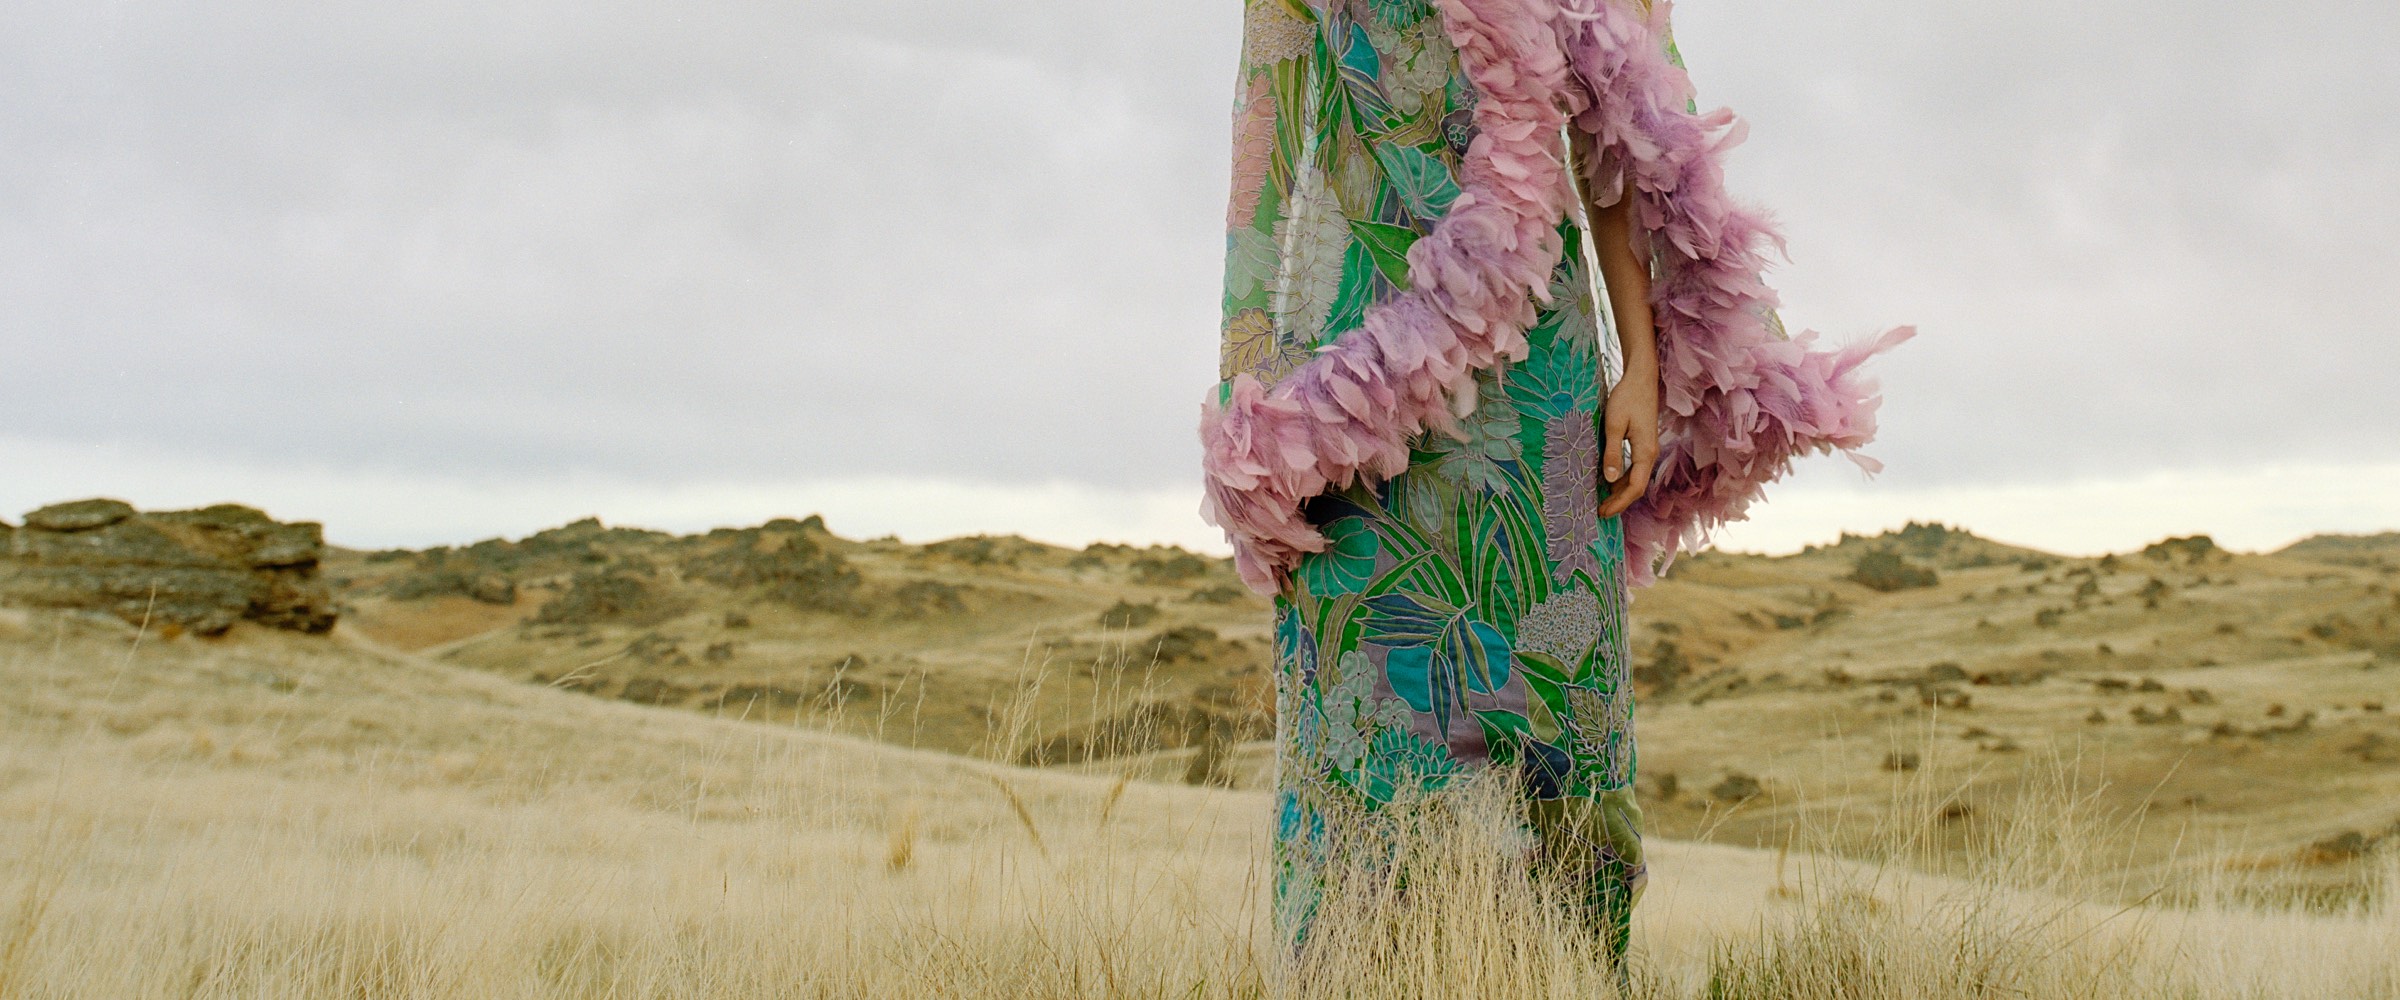 A model wearing a dress patterned in blue, pink and green, standing on a golden hills with a pink boa draped over her